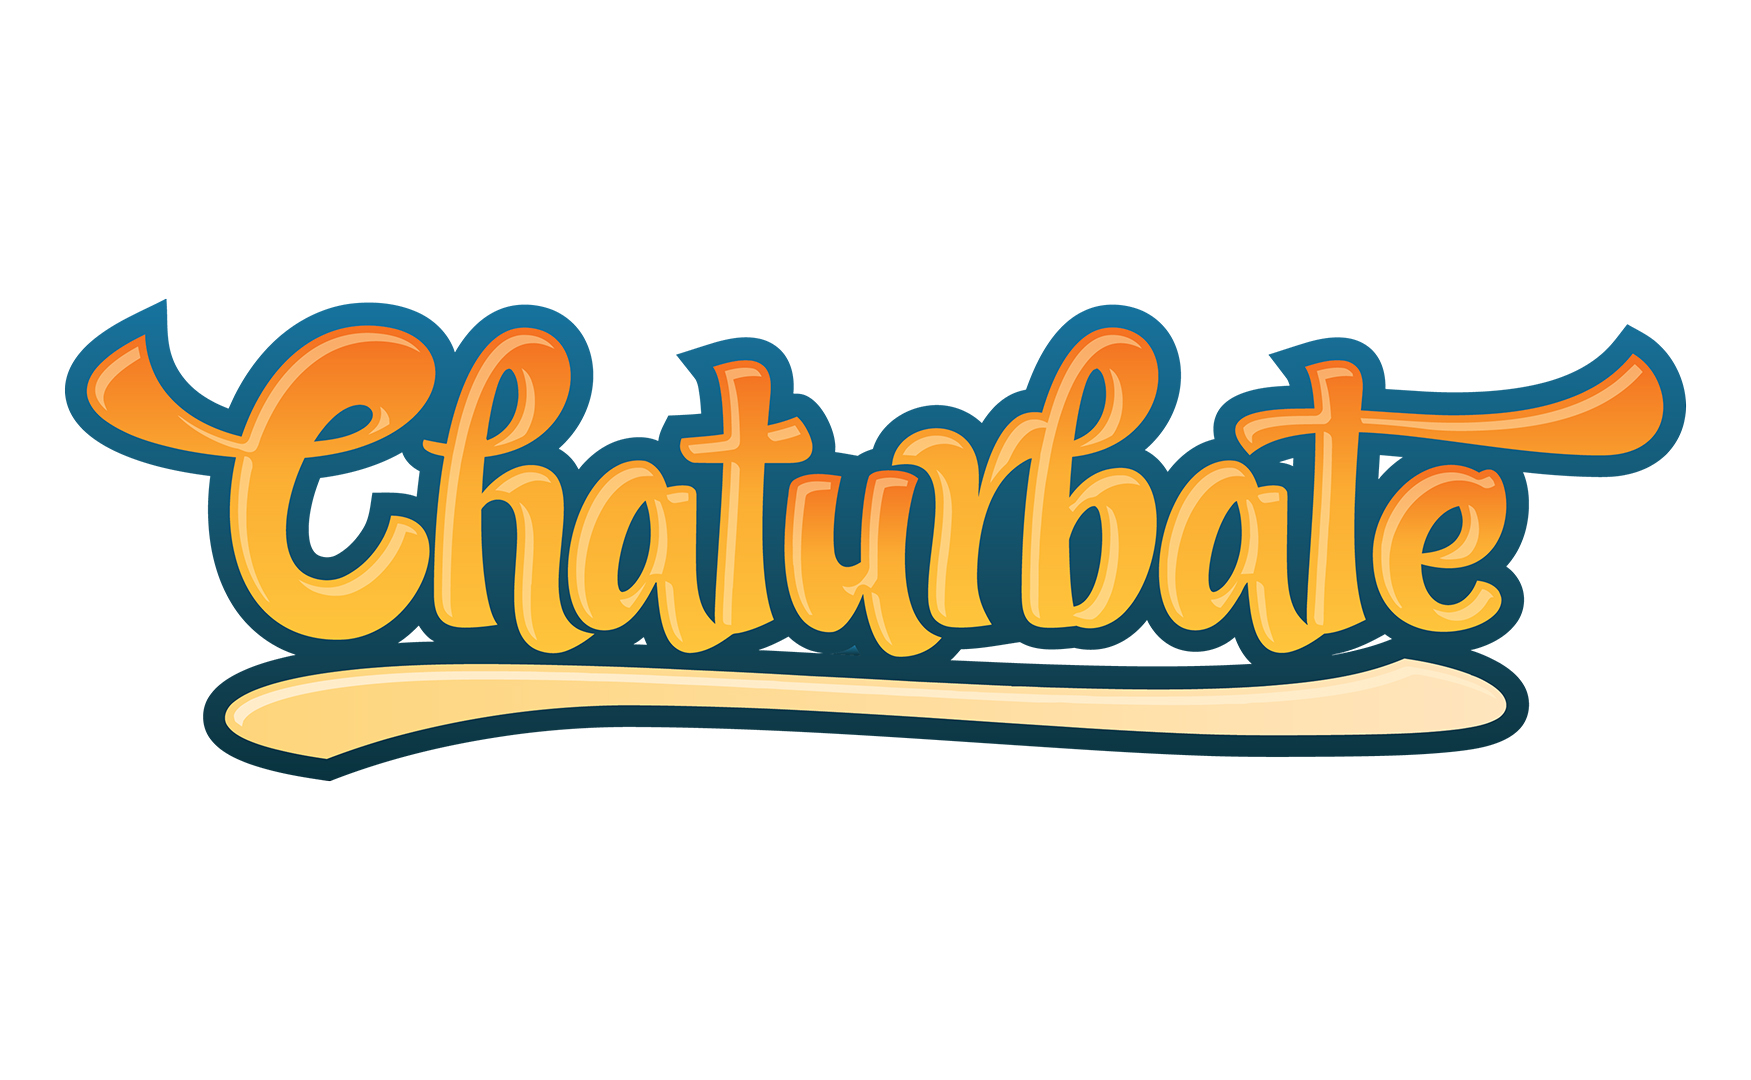 Chatterbater